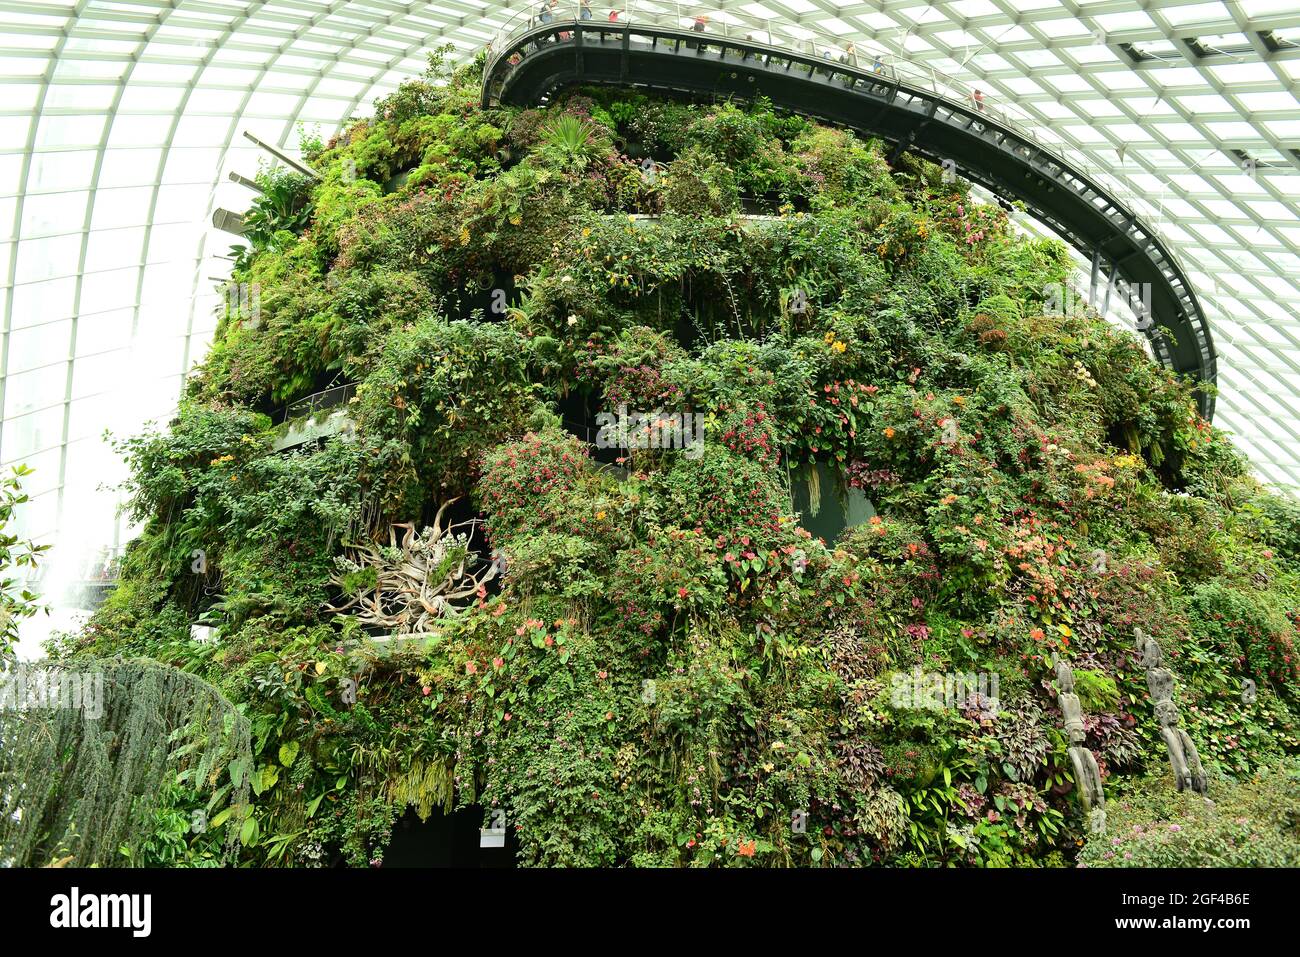 Singapore, Gardens by the Bay. Cloud forest dome. Stock Photo